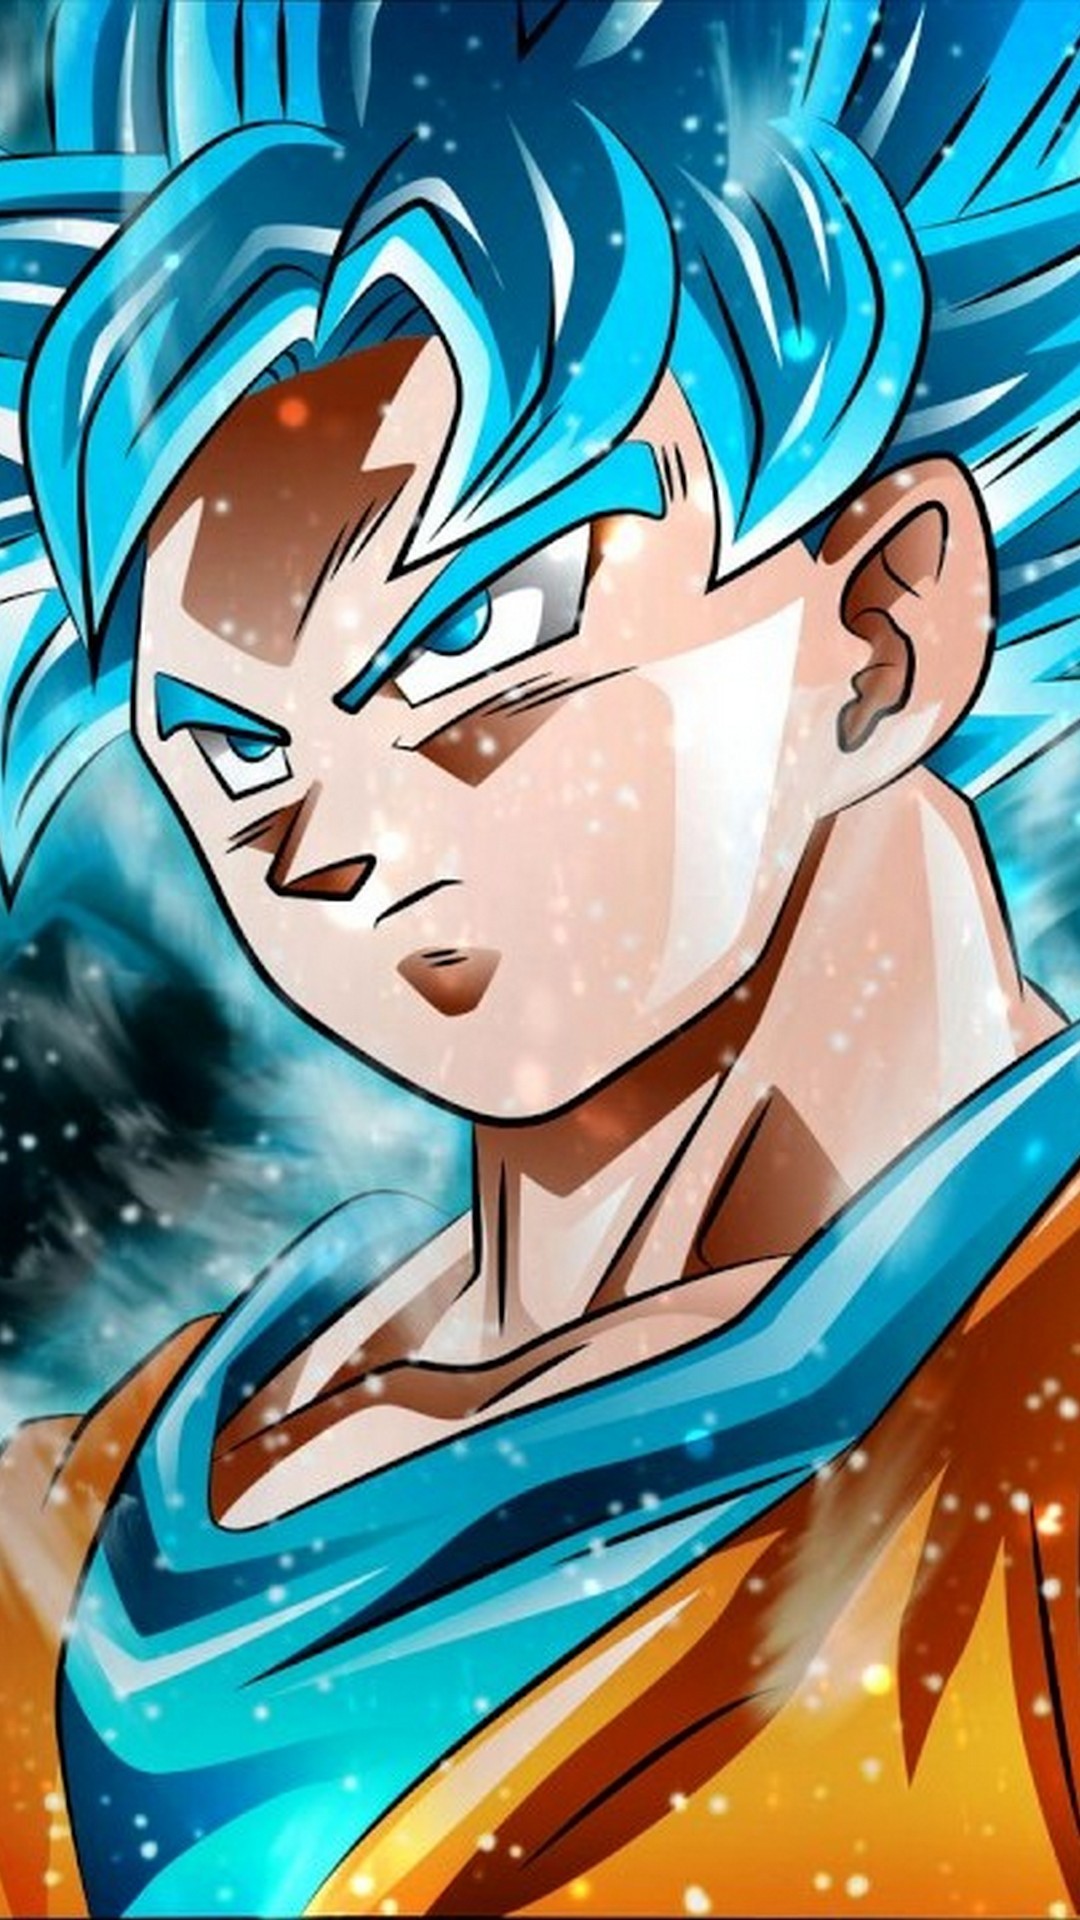 Goku SSJ Wallpaper iPhone with image resolution 1080x1920 pixel. You can make this wallpaper for your iPhone 5, 6, 7, 8, X backgrounds, Mobile Screensaver, or iPad Lock Screen